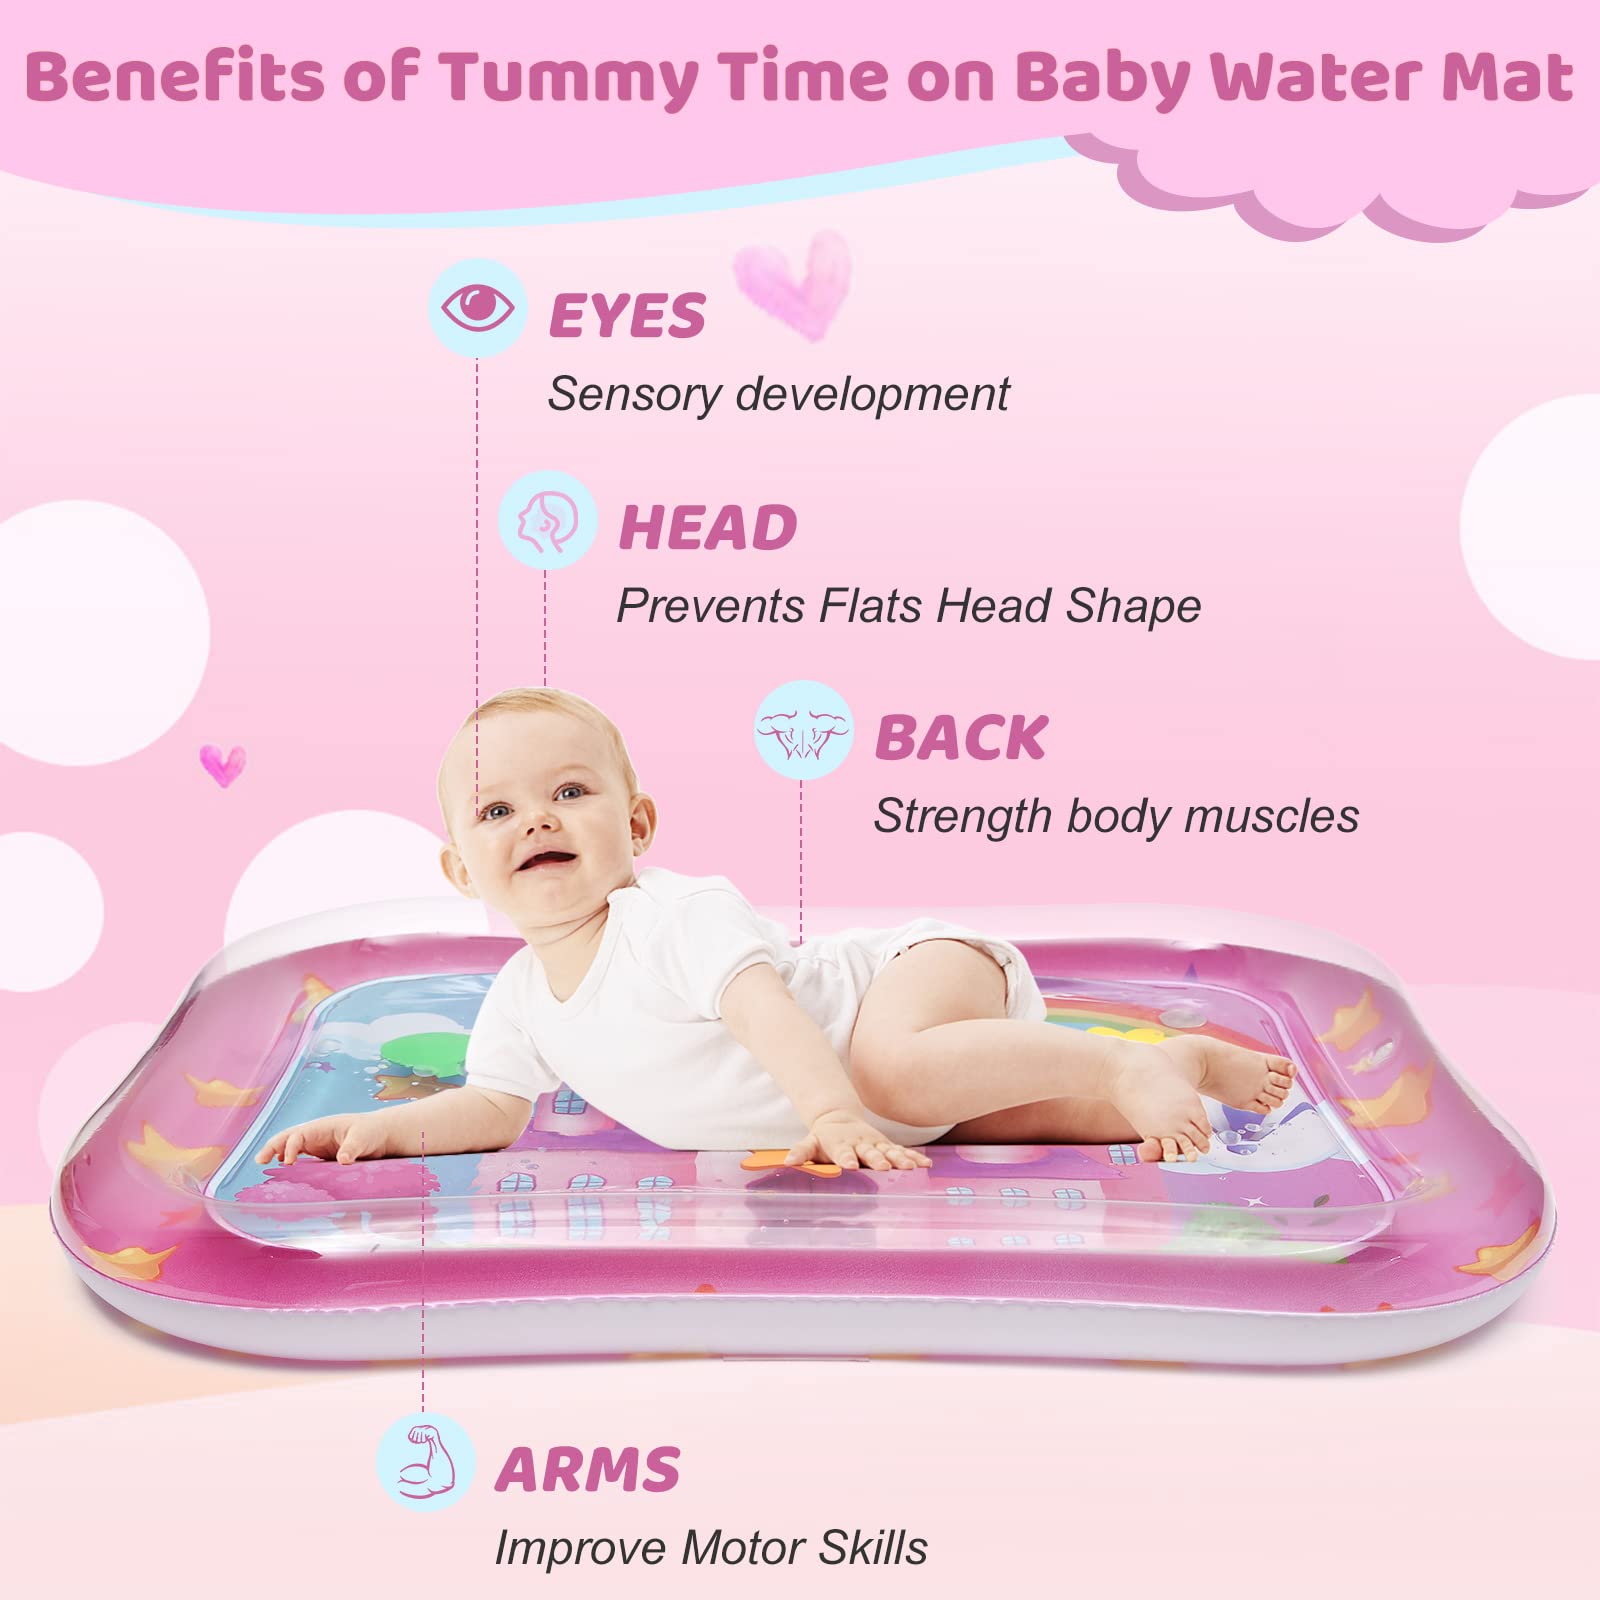 Inflatable Tummy Time Mat, Baby Girl Toys for 3 6 9 Months Infant Sensory Development, Tummy Time Toys for Baby Girl Gifts, Great Gift Idea for Newborns